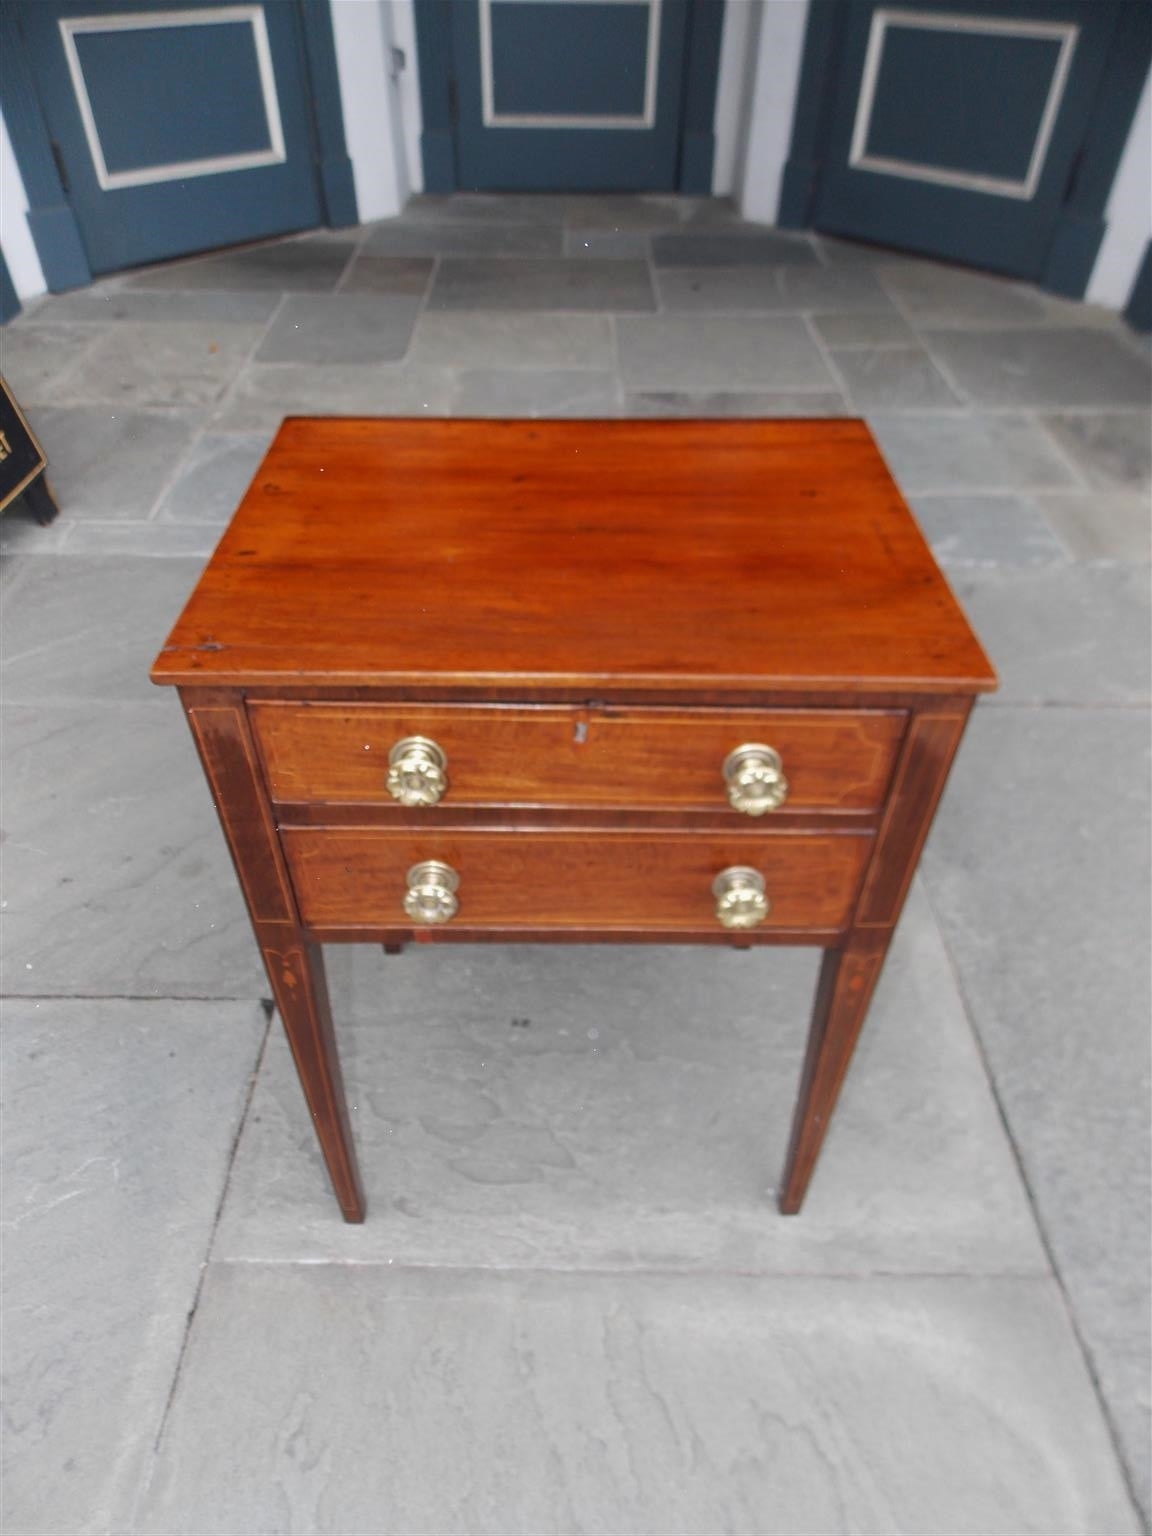 Charleston mahogany two-drawer side table with holly string inlay, dotted bell flowers, original brass floral knobs and terminating on squared tapered legs. Secondary wood consist of white pine. Table is finished on all sides. Descended from a local